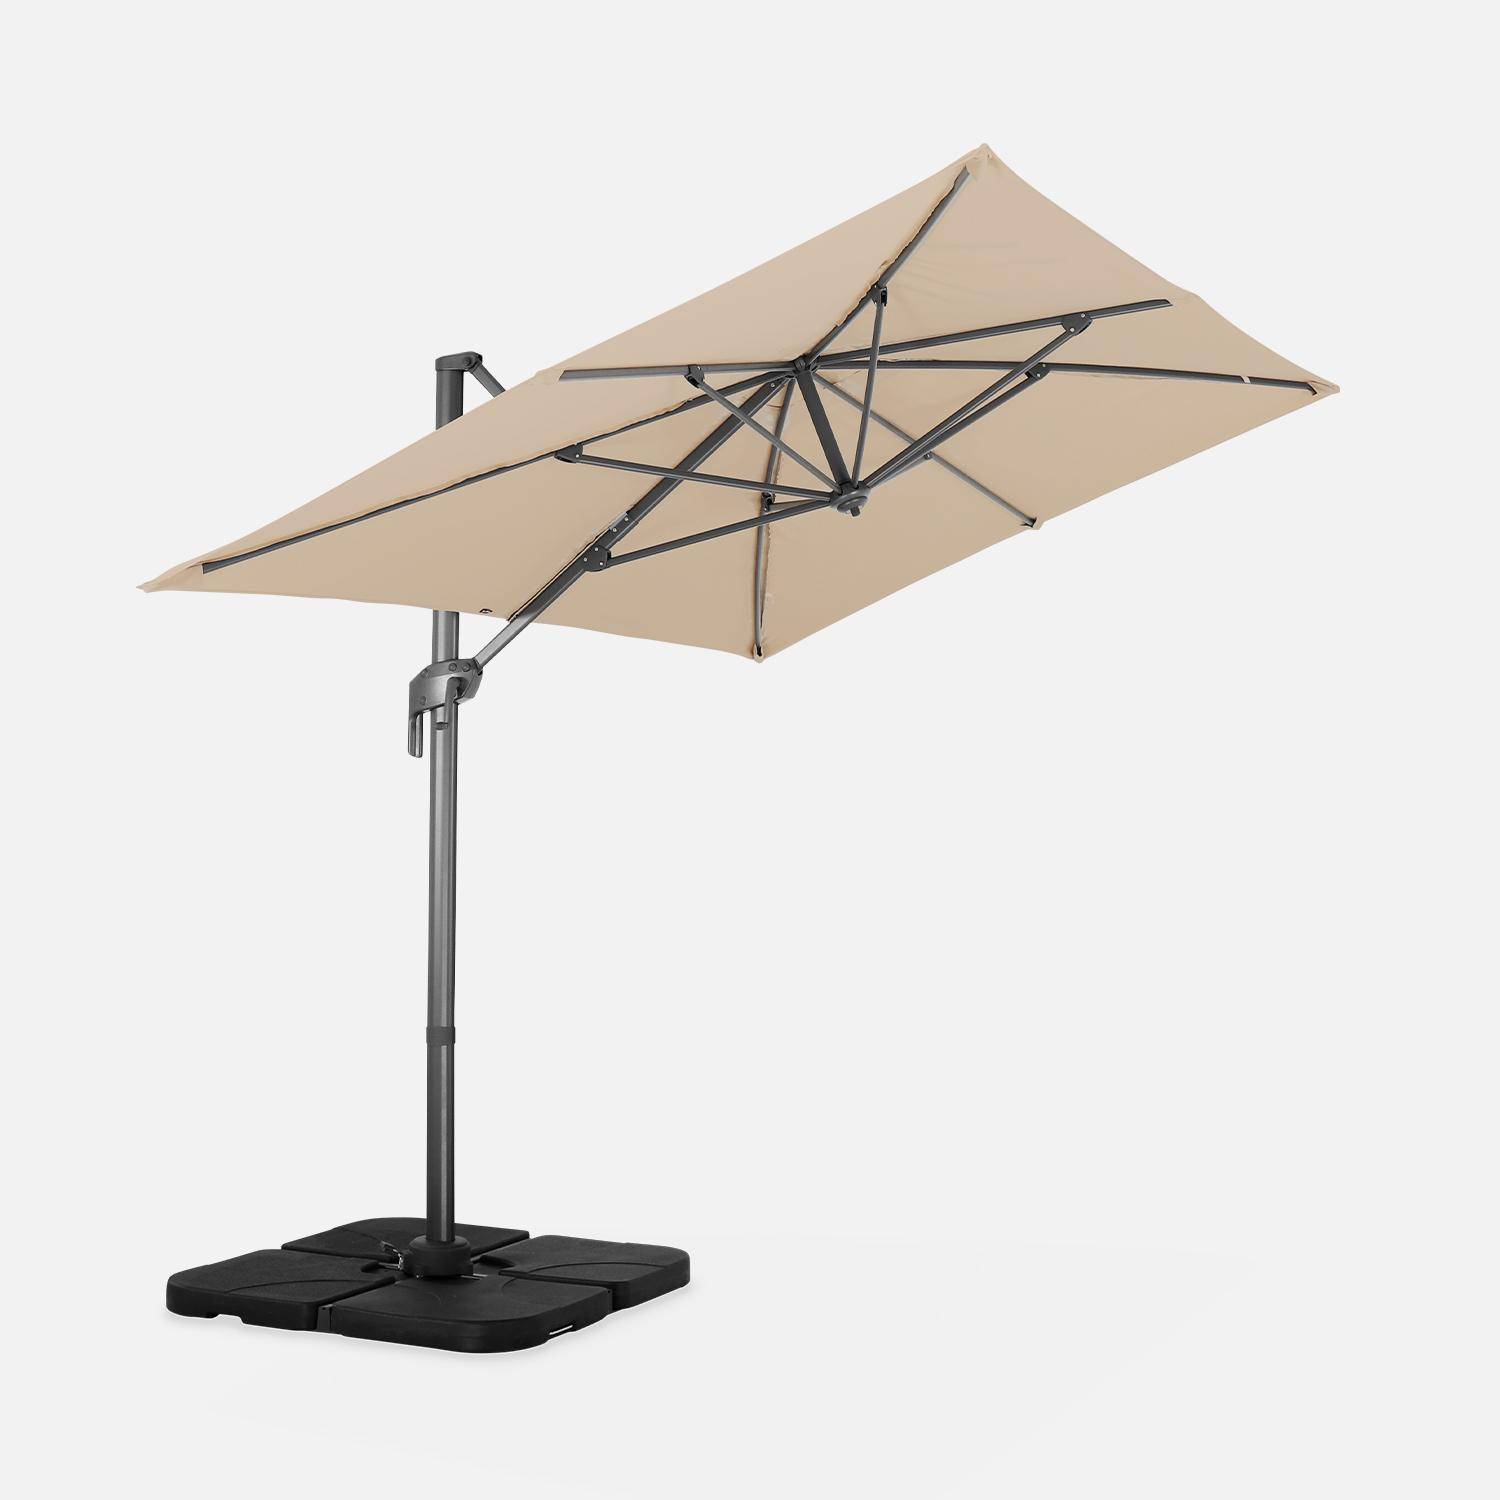 2x3m rectangular cantilever paraso - parasol can be tilted, folded and rotated 360 degreesl - Antibes - Beige,sweeek,Photo4